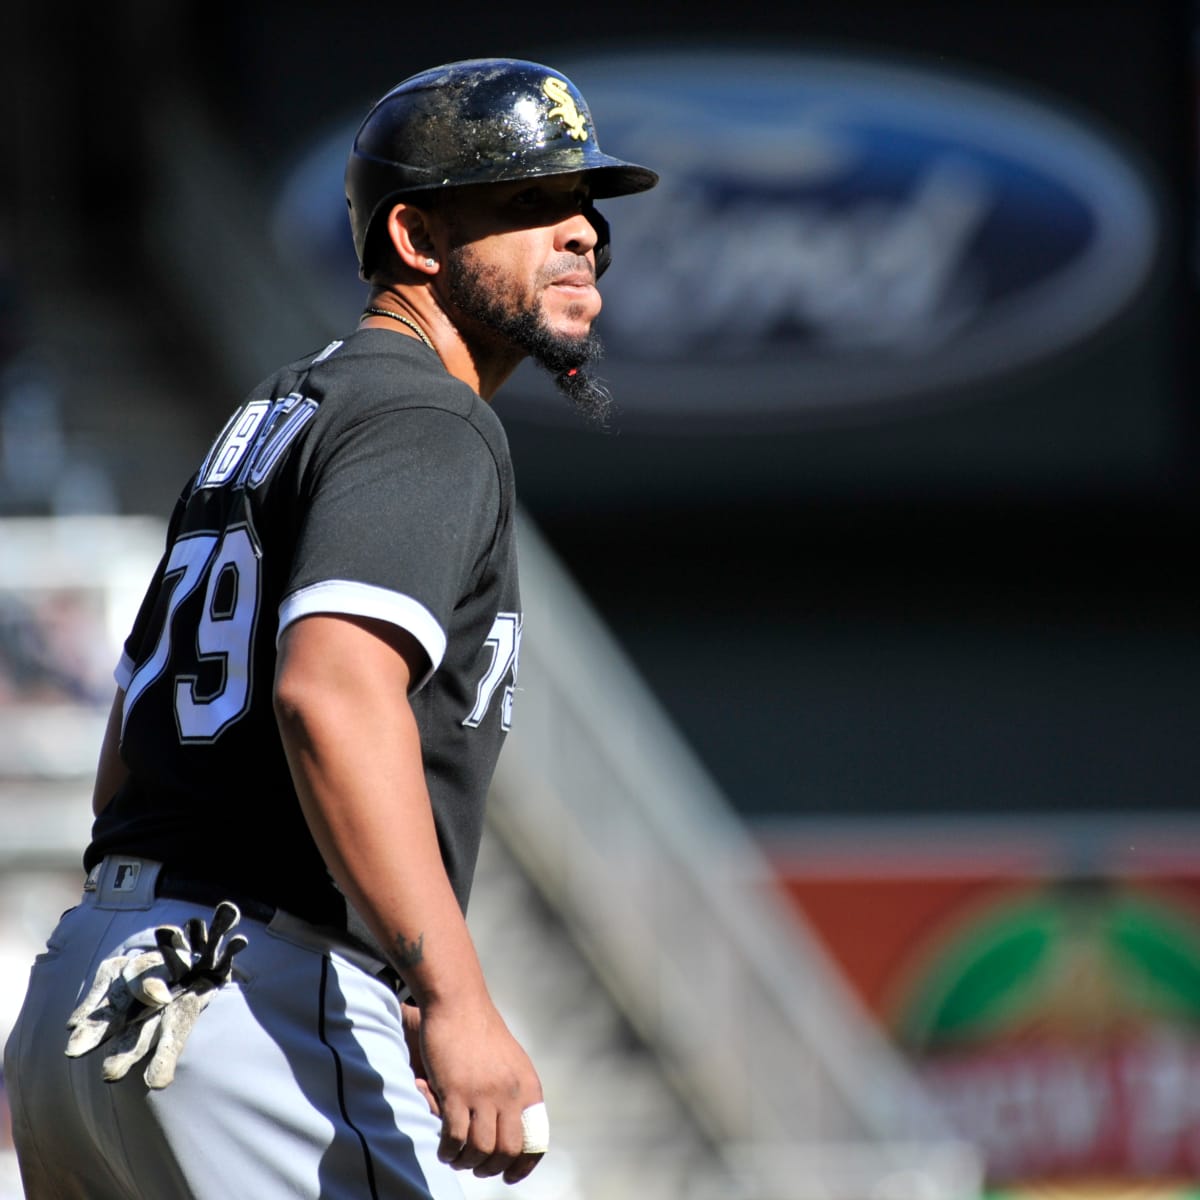 MLB free agency: What makes José Abreu a perfect fit for Astros